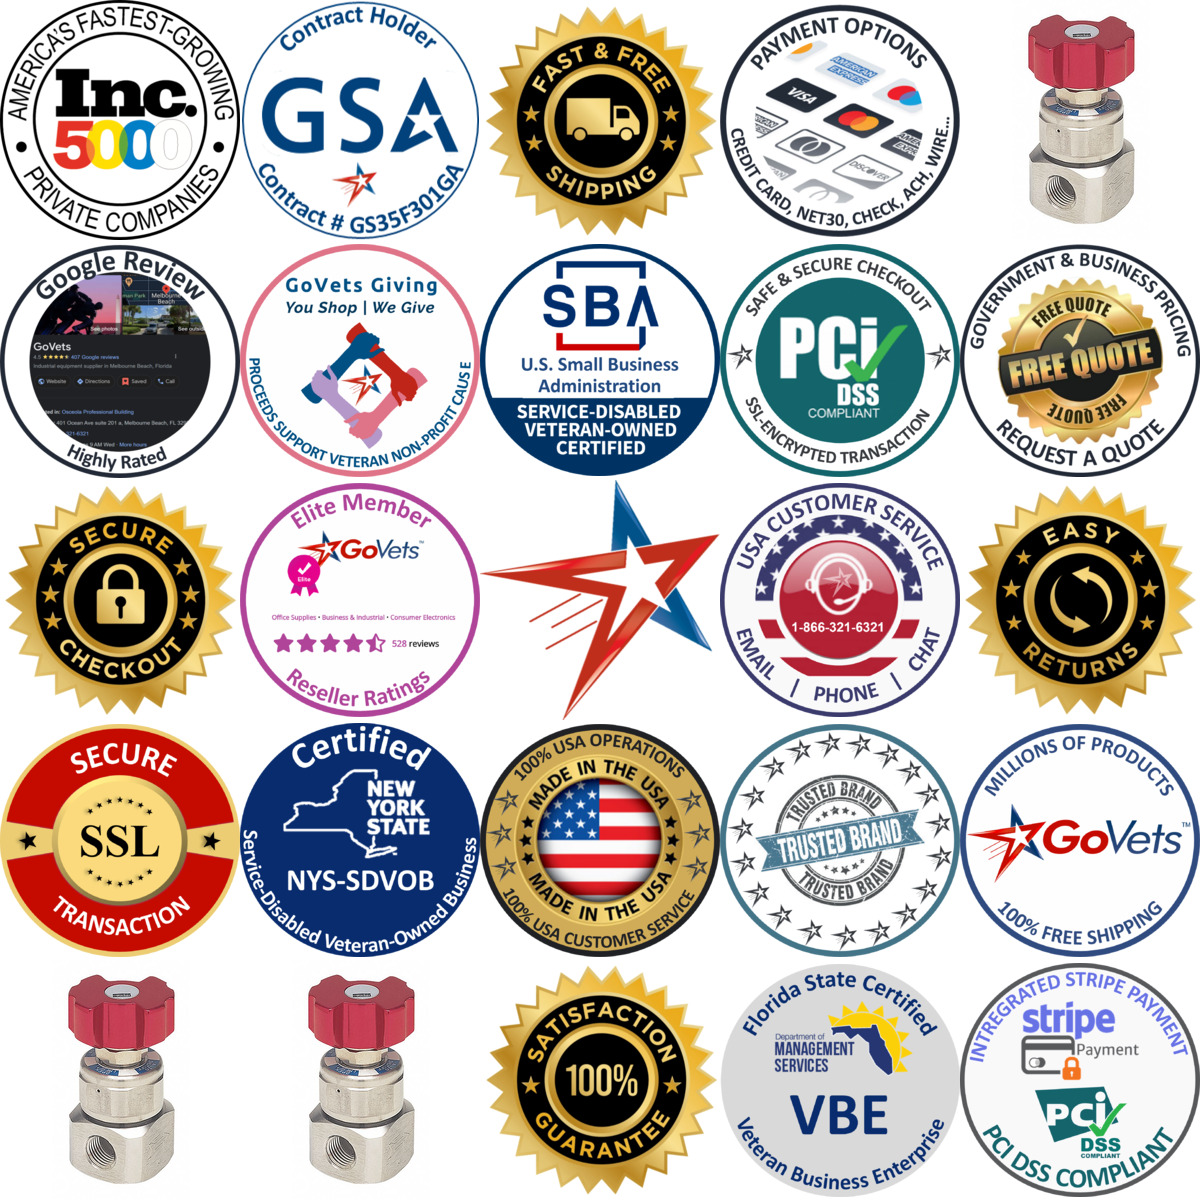 A selection of Excess Flow Valves products on GoVets